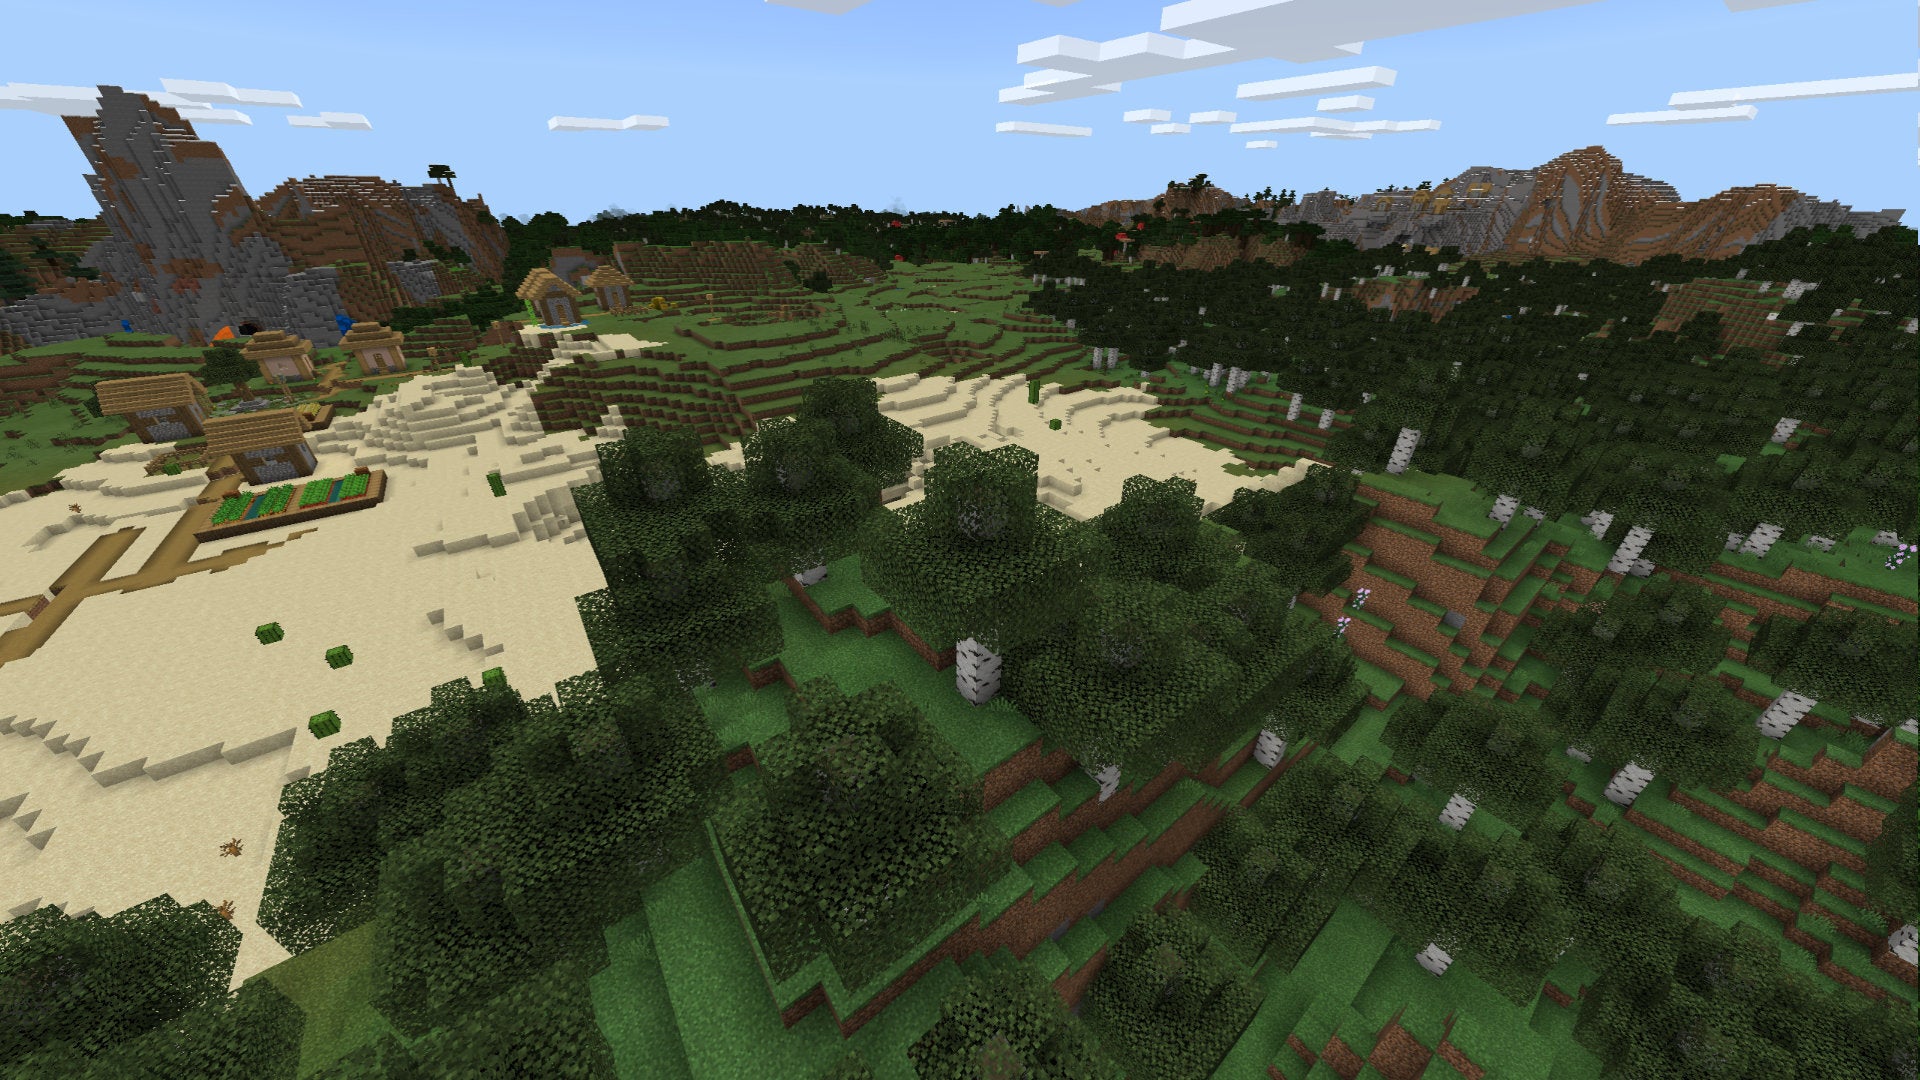 A Minecraft Bedrock screenshot of a landscape displayed using the Compromise Texture Pack.